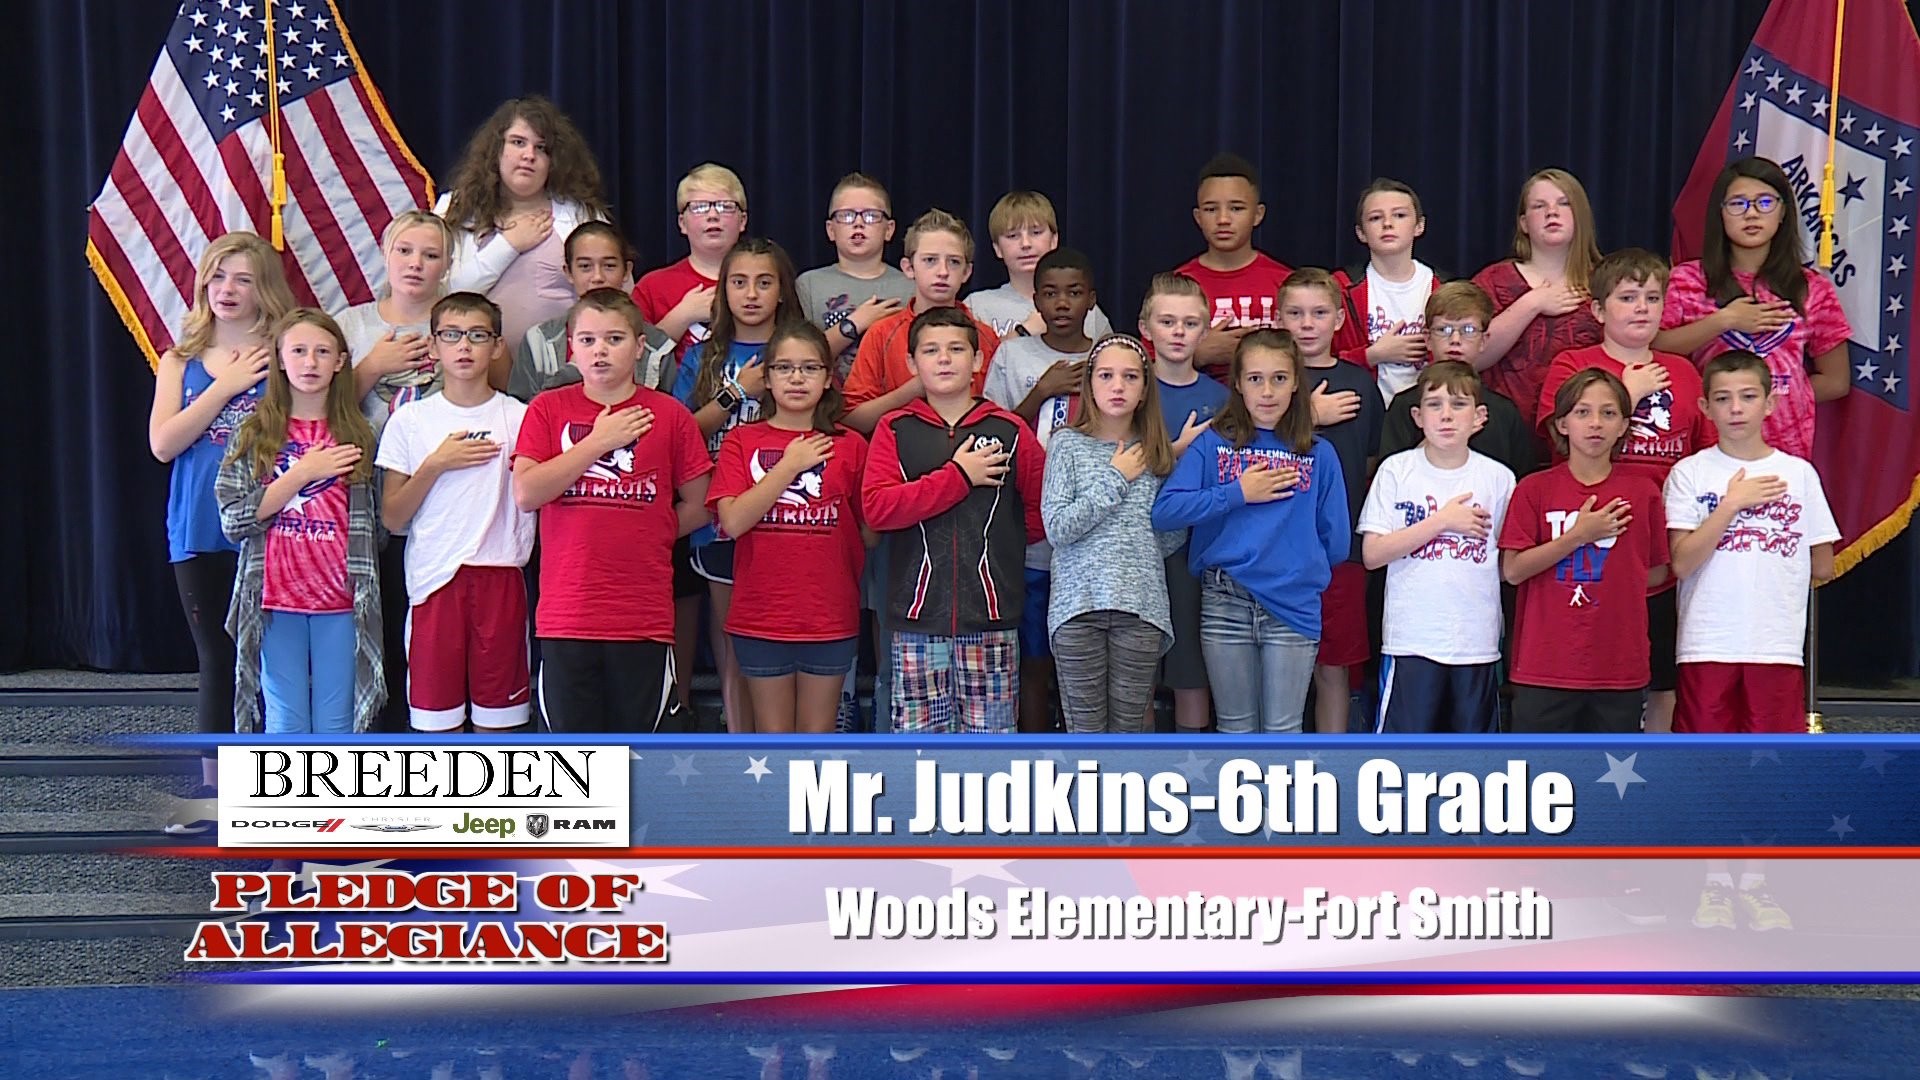 Mr. Judkins  6th Grade  Woods  Elementary  Fort Smith